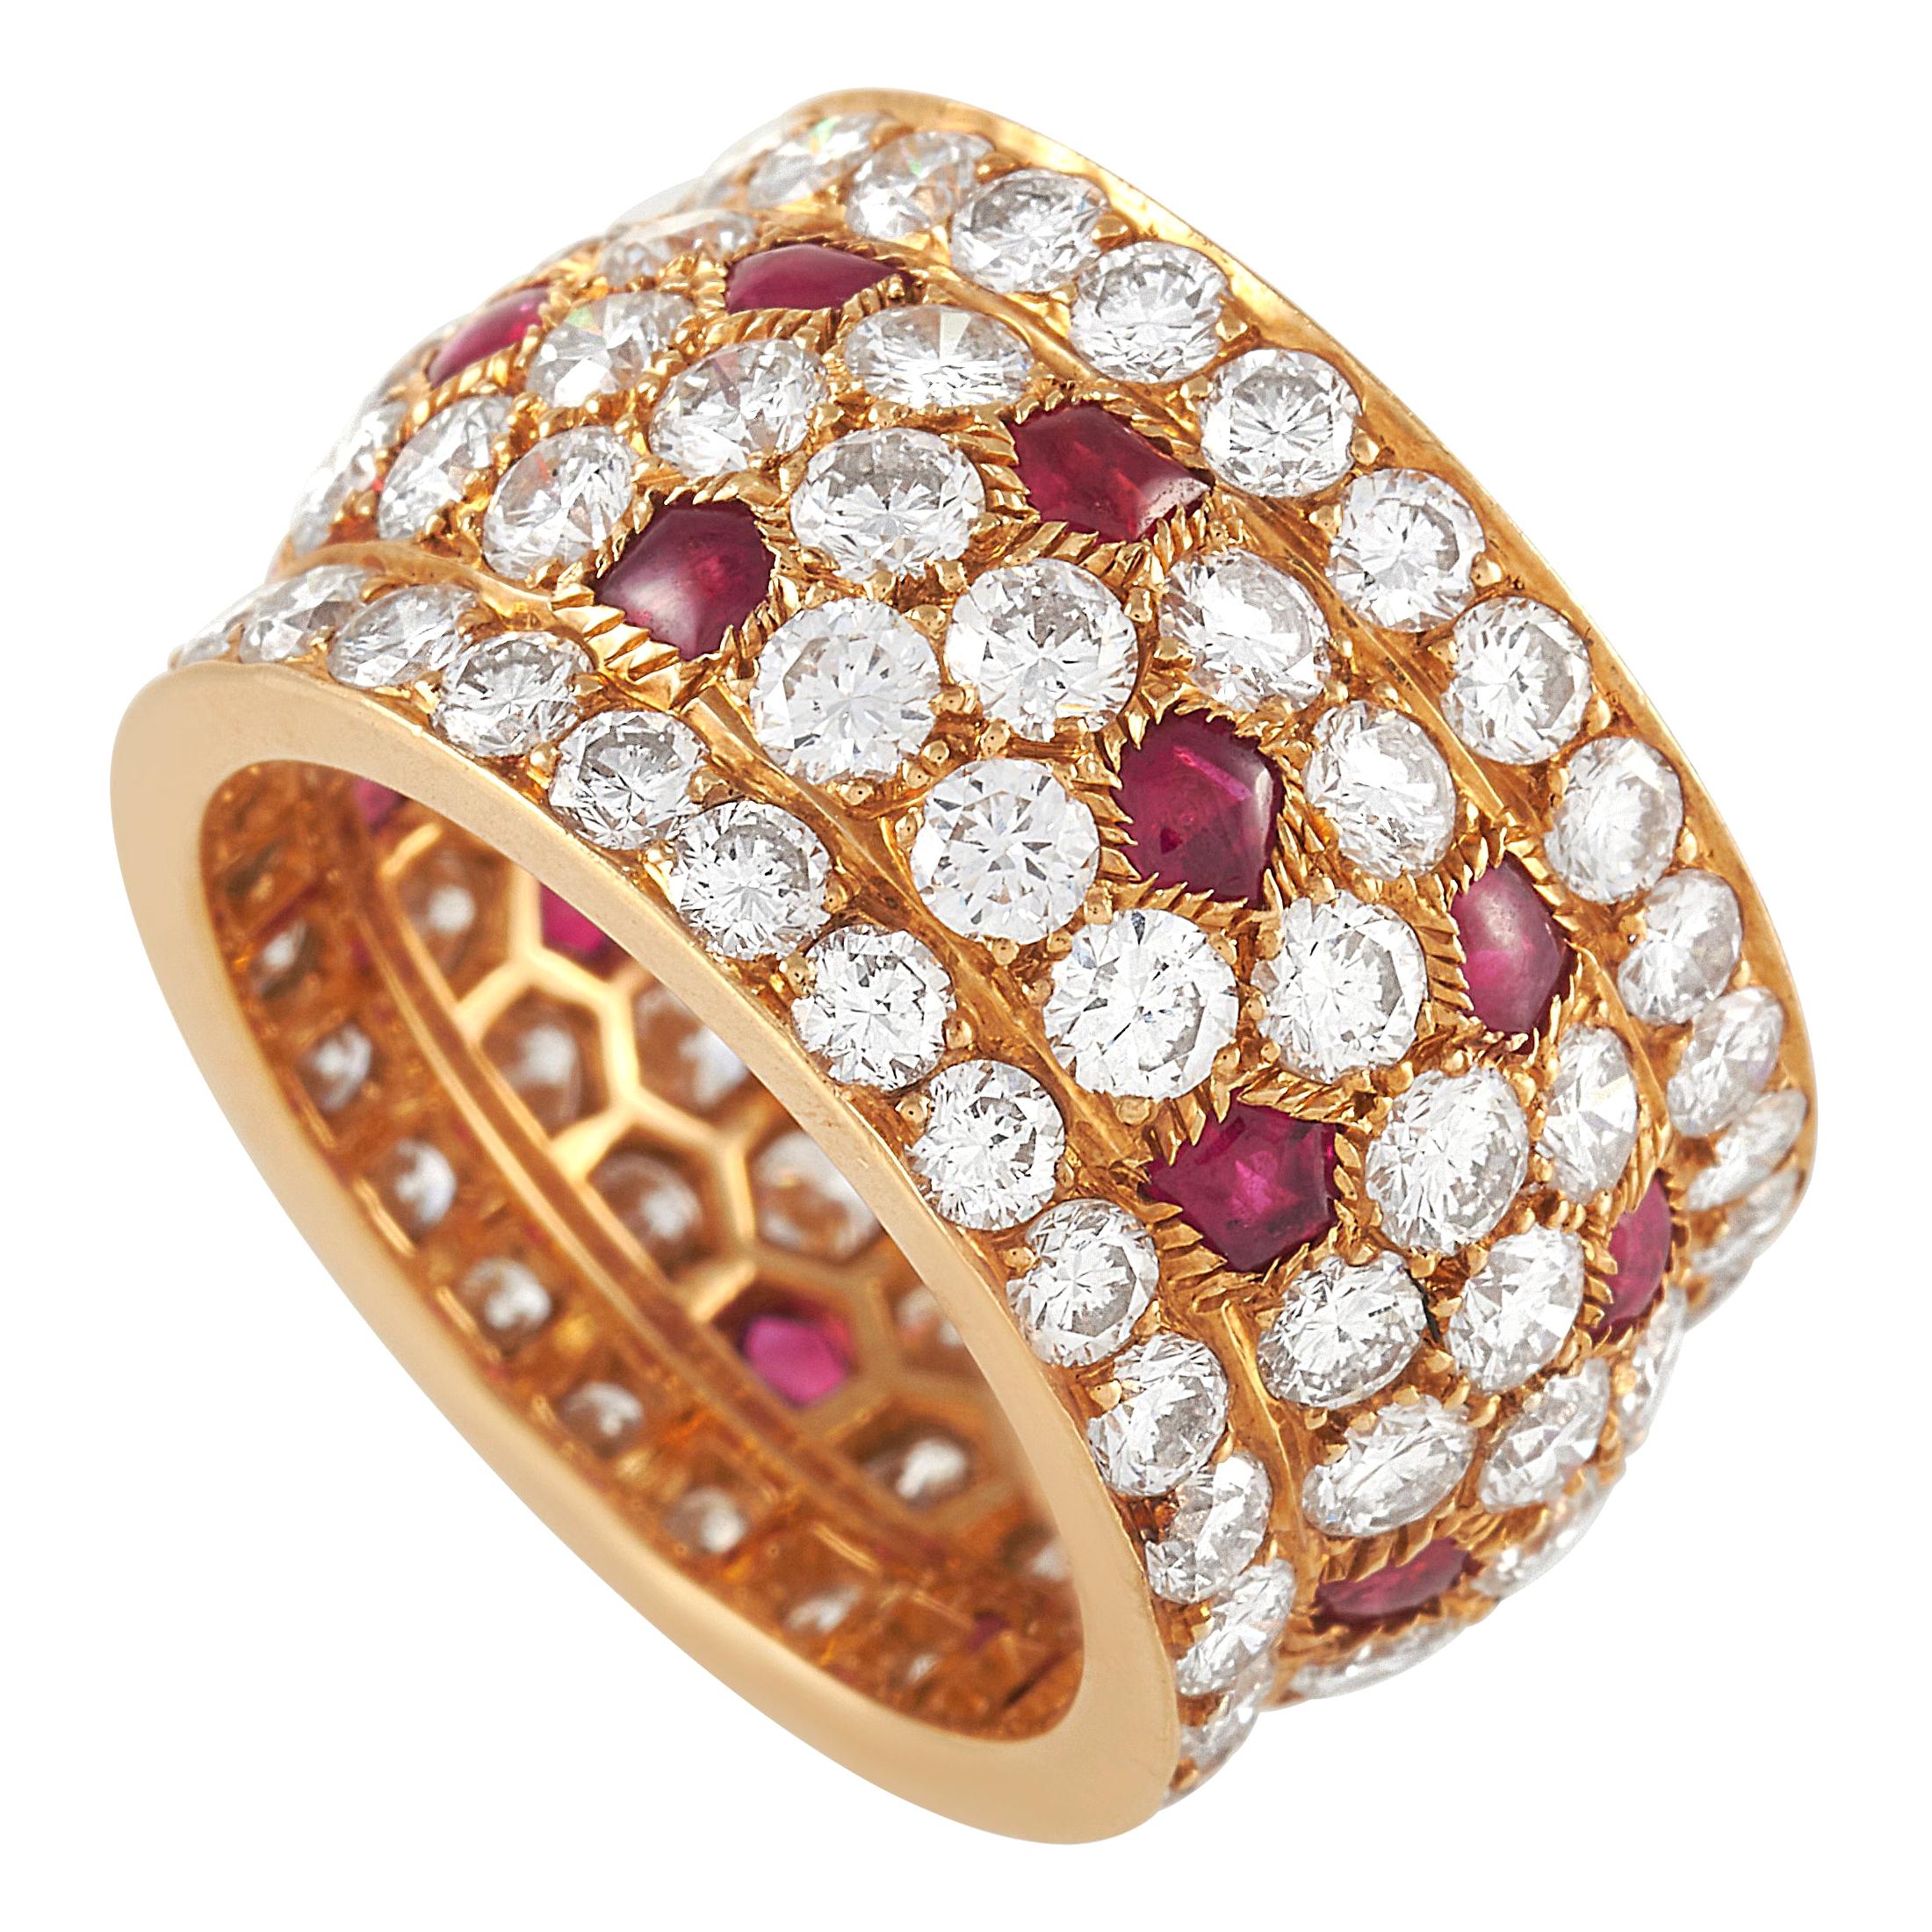 Cartier Nigeria 18k Yellow Gold Diamond and Ruby Ring